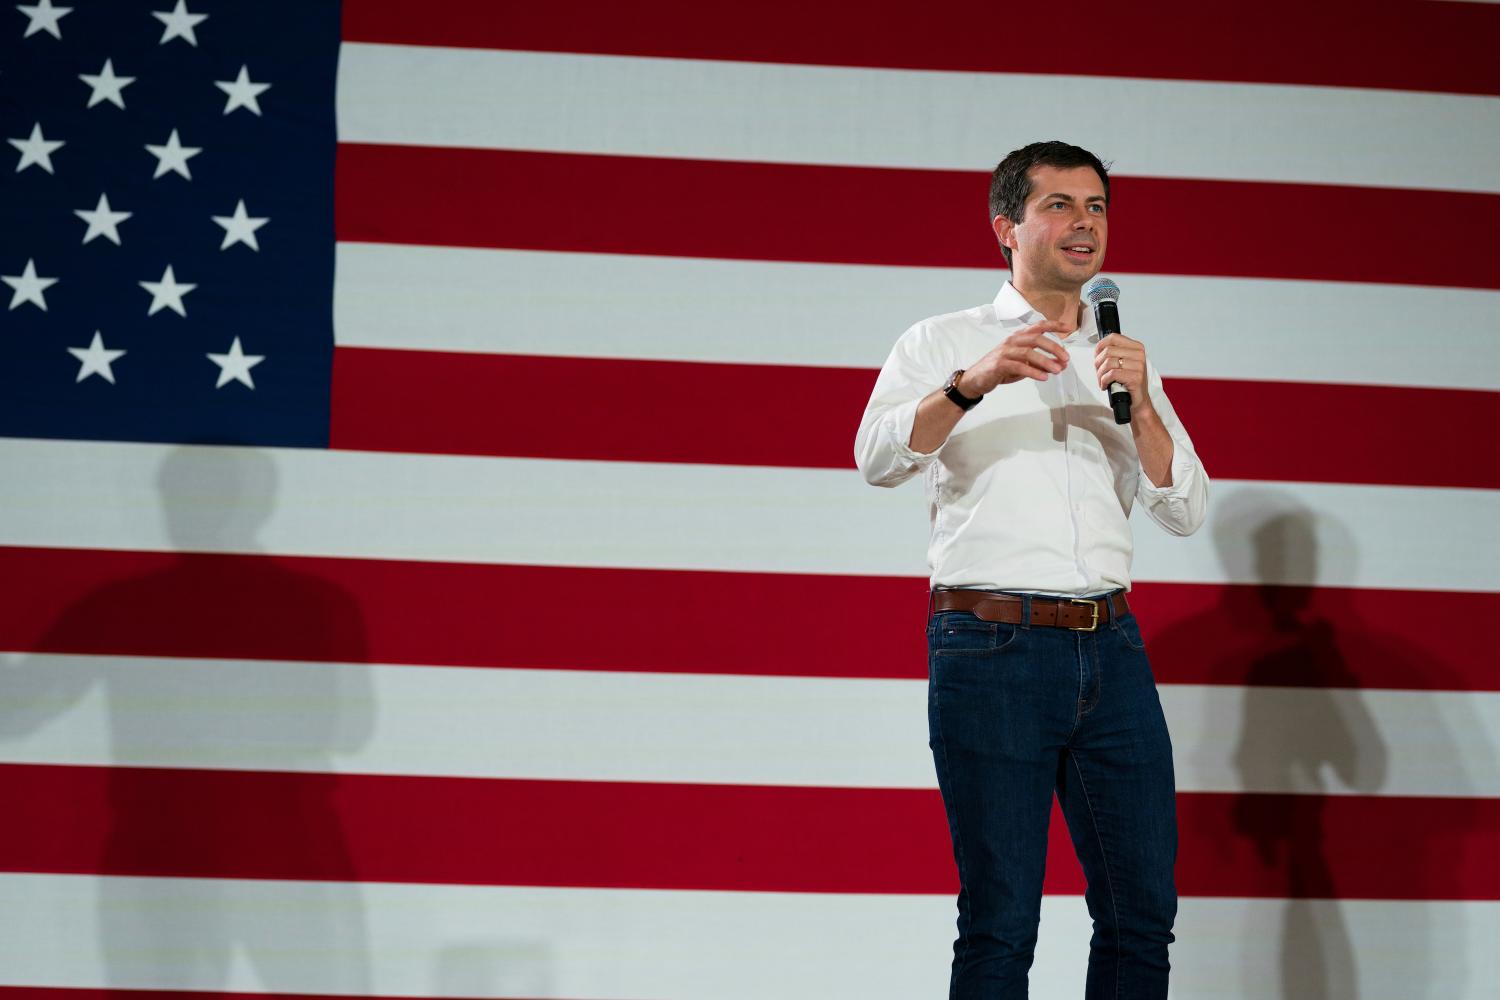 Pete Buttigieg, South Bend Mayor and Democratic presidential hopeful, speaks at a campaign event in Newton, Iowa, U.S. Sept. 21, 2019.   REUTERS/Elijah Nouvelage